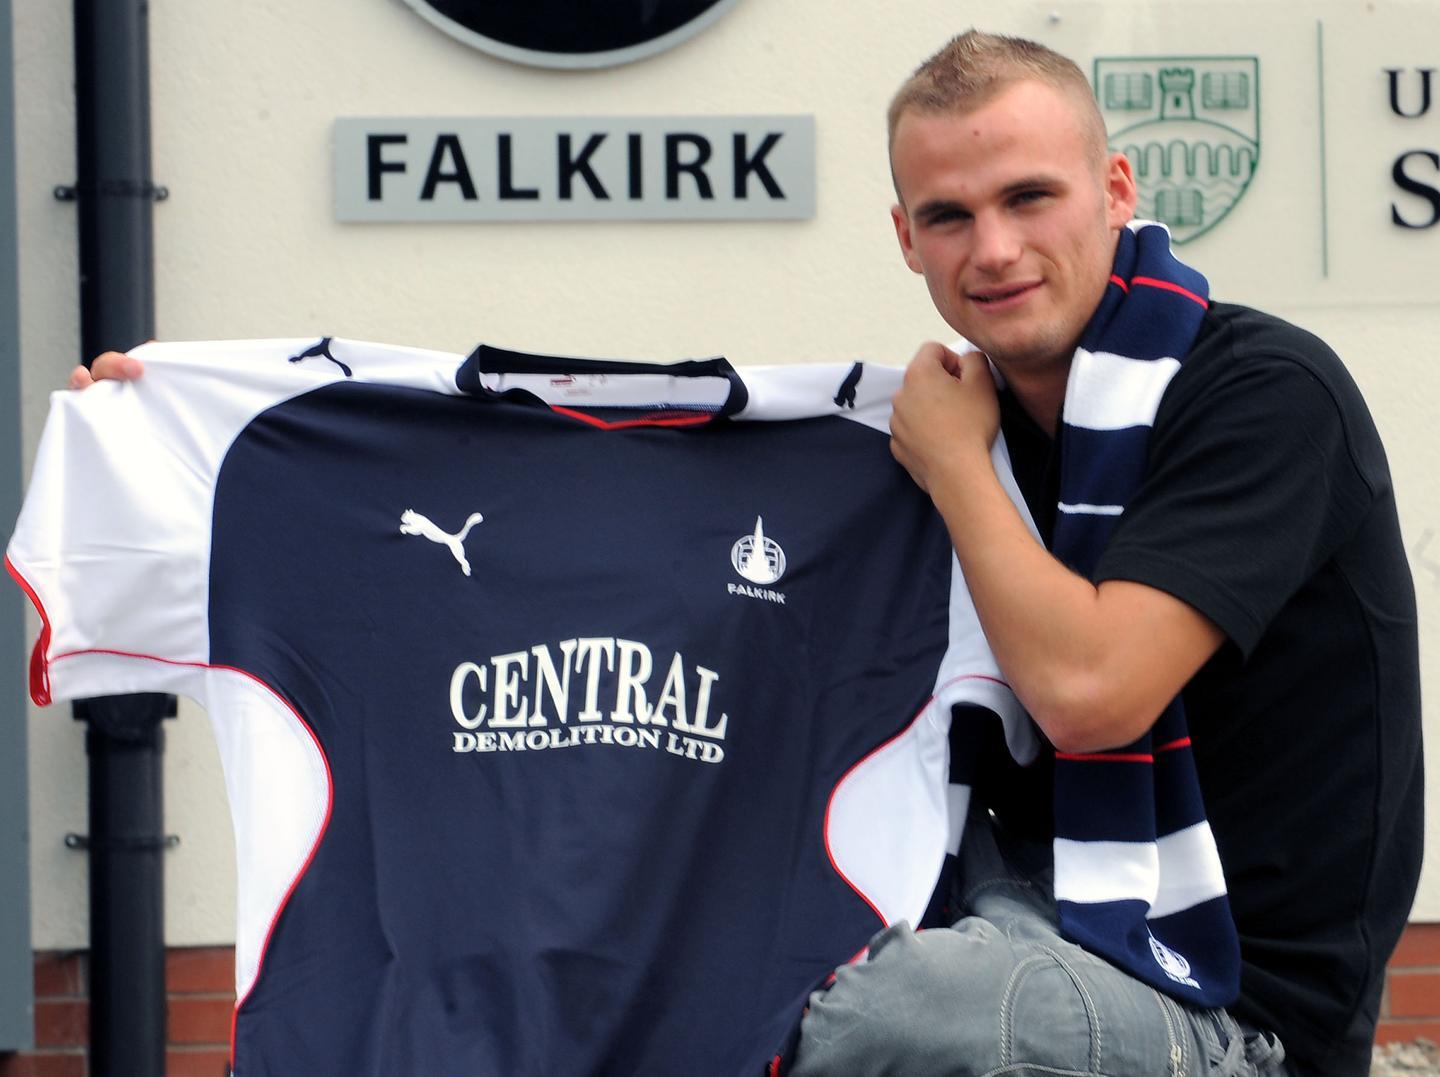 The English striker joined David Robertson's Real Kashmir in the I-League in 2019. After leaving Falkirk in 2012 he represented Motherwell, Partick Thistle, Kilmarnock and Dunfermlie as well as three clubs down south.